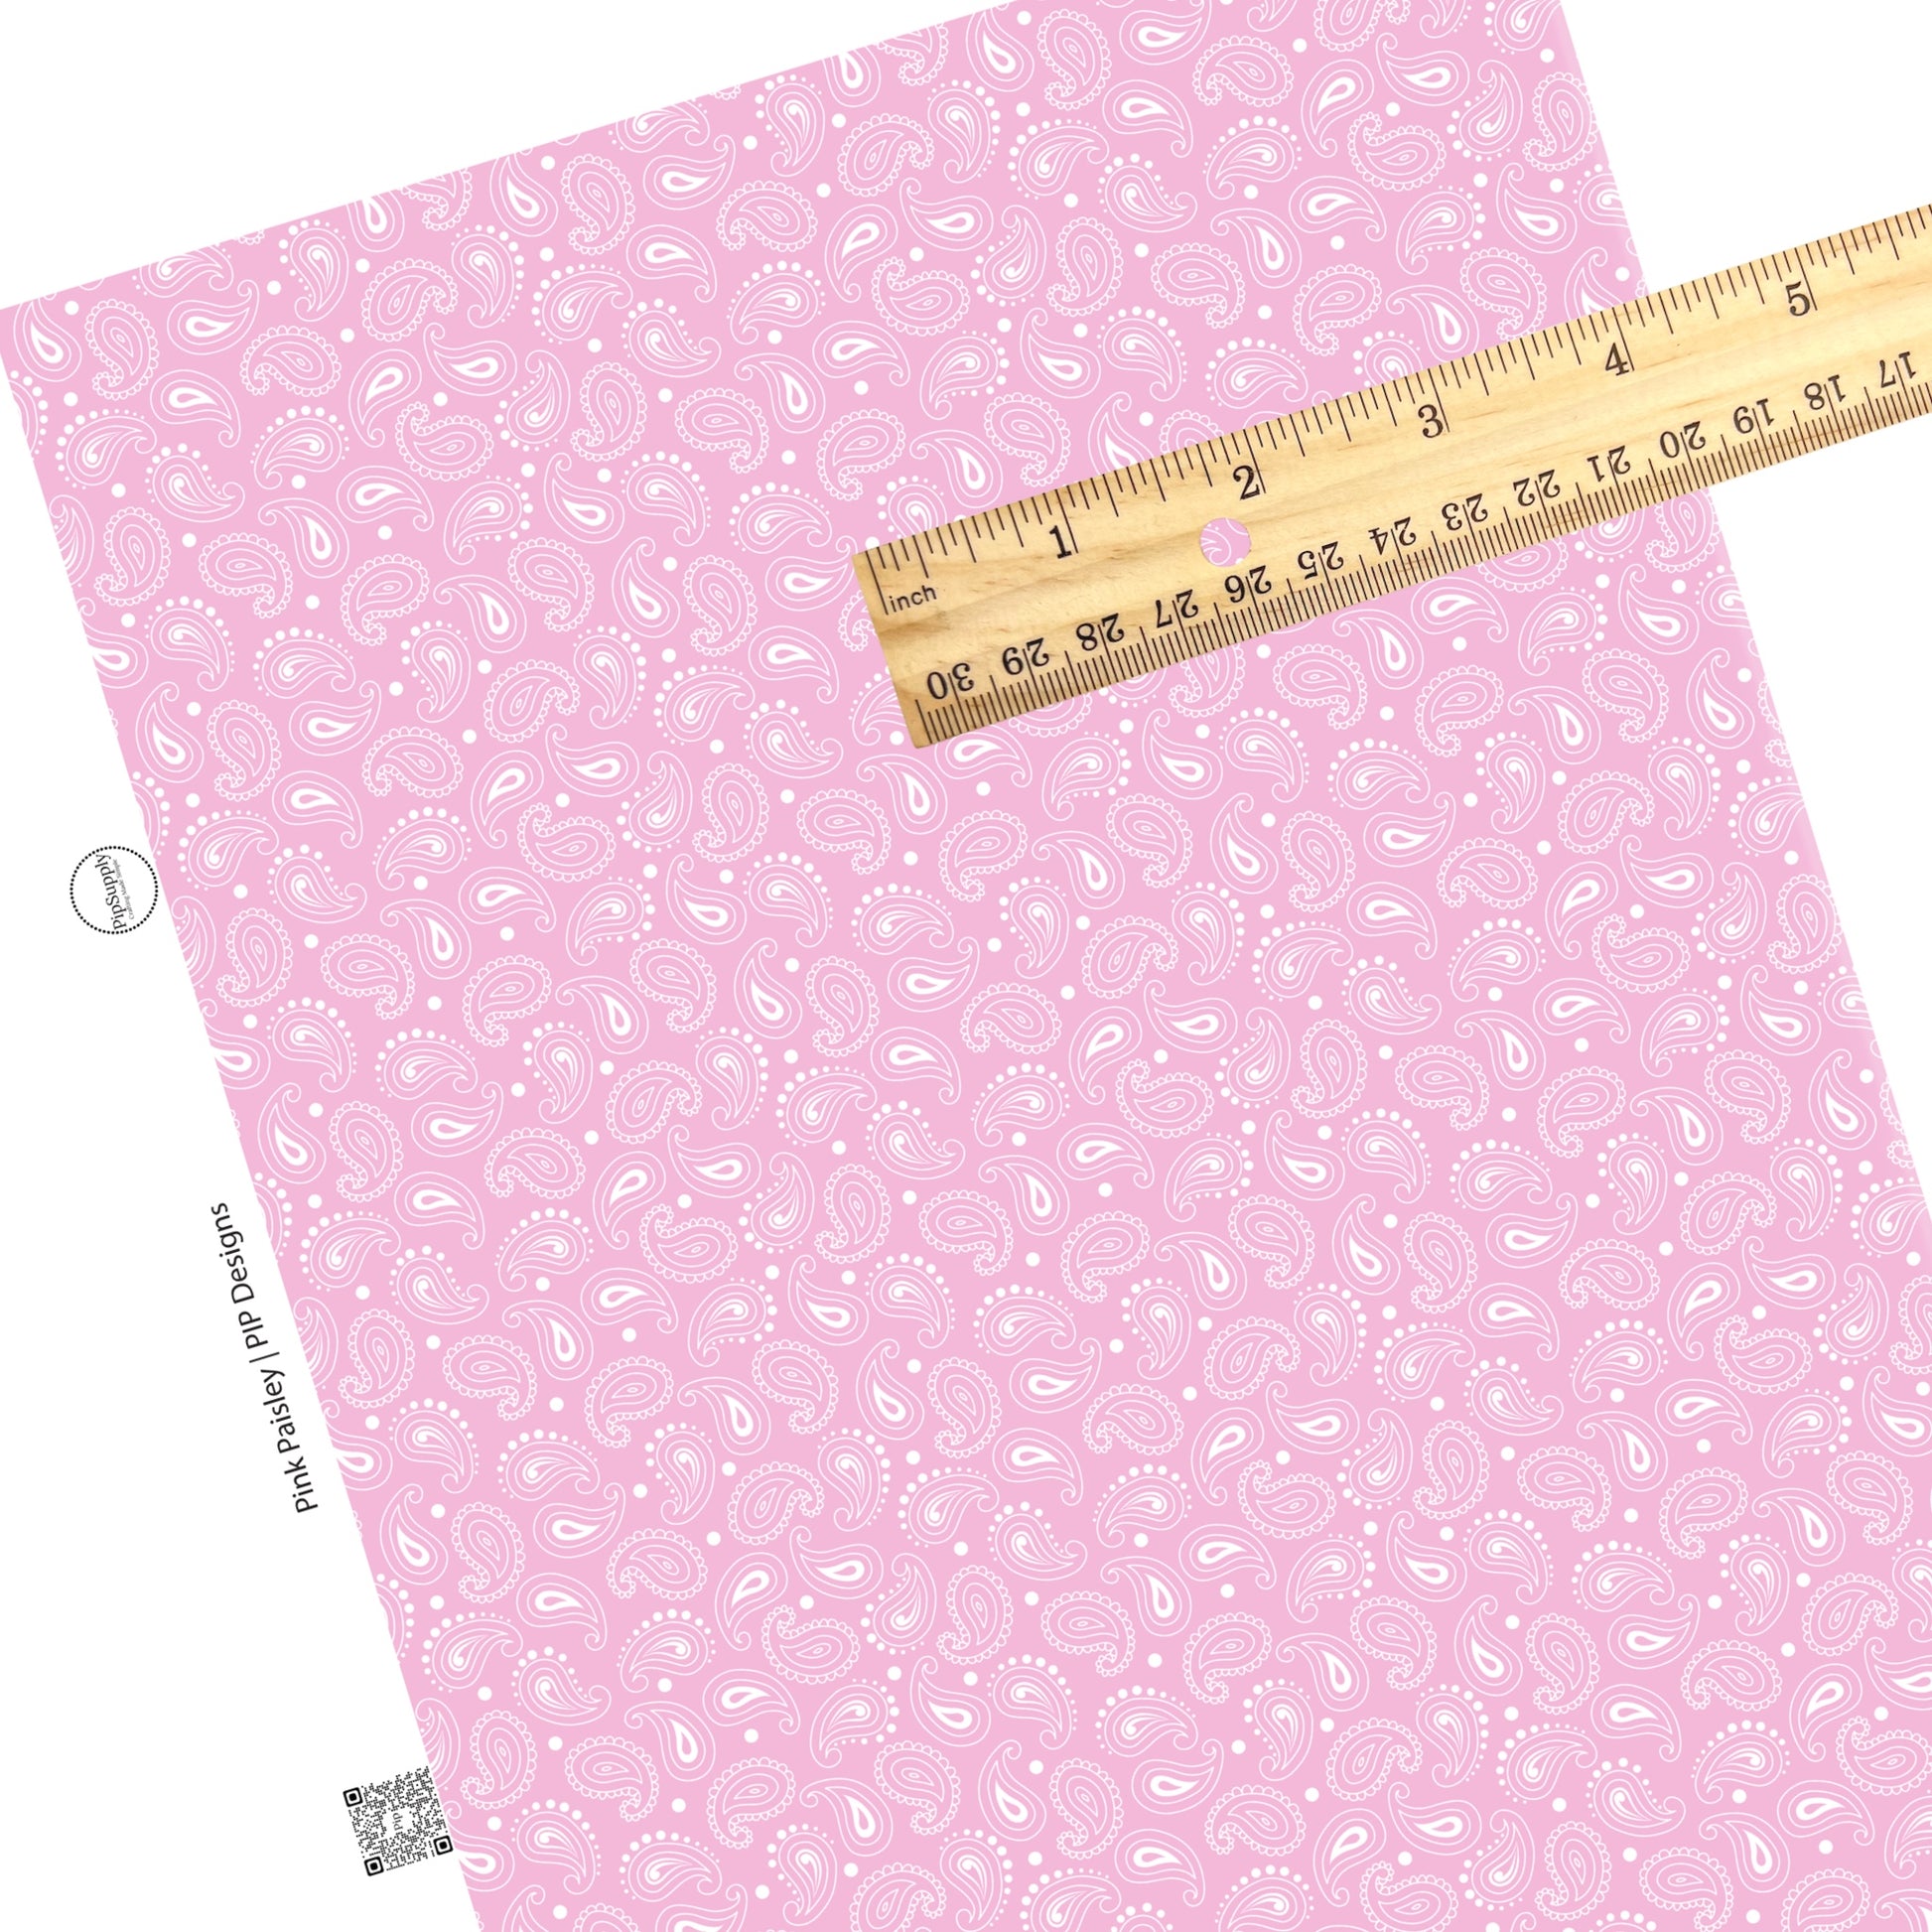 These western pattern themed faux leather sheets contain the following design elements: light pink paisley patterns. Our CPSIA compliant faux leather sheets or rolls can be used for all types of crafting projects.